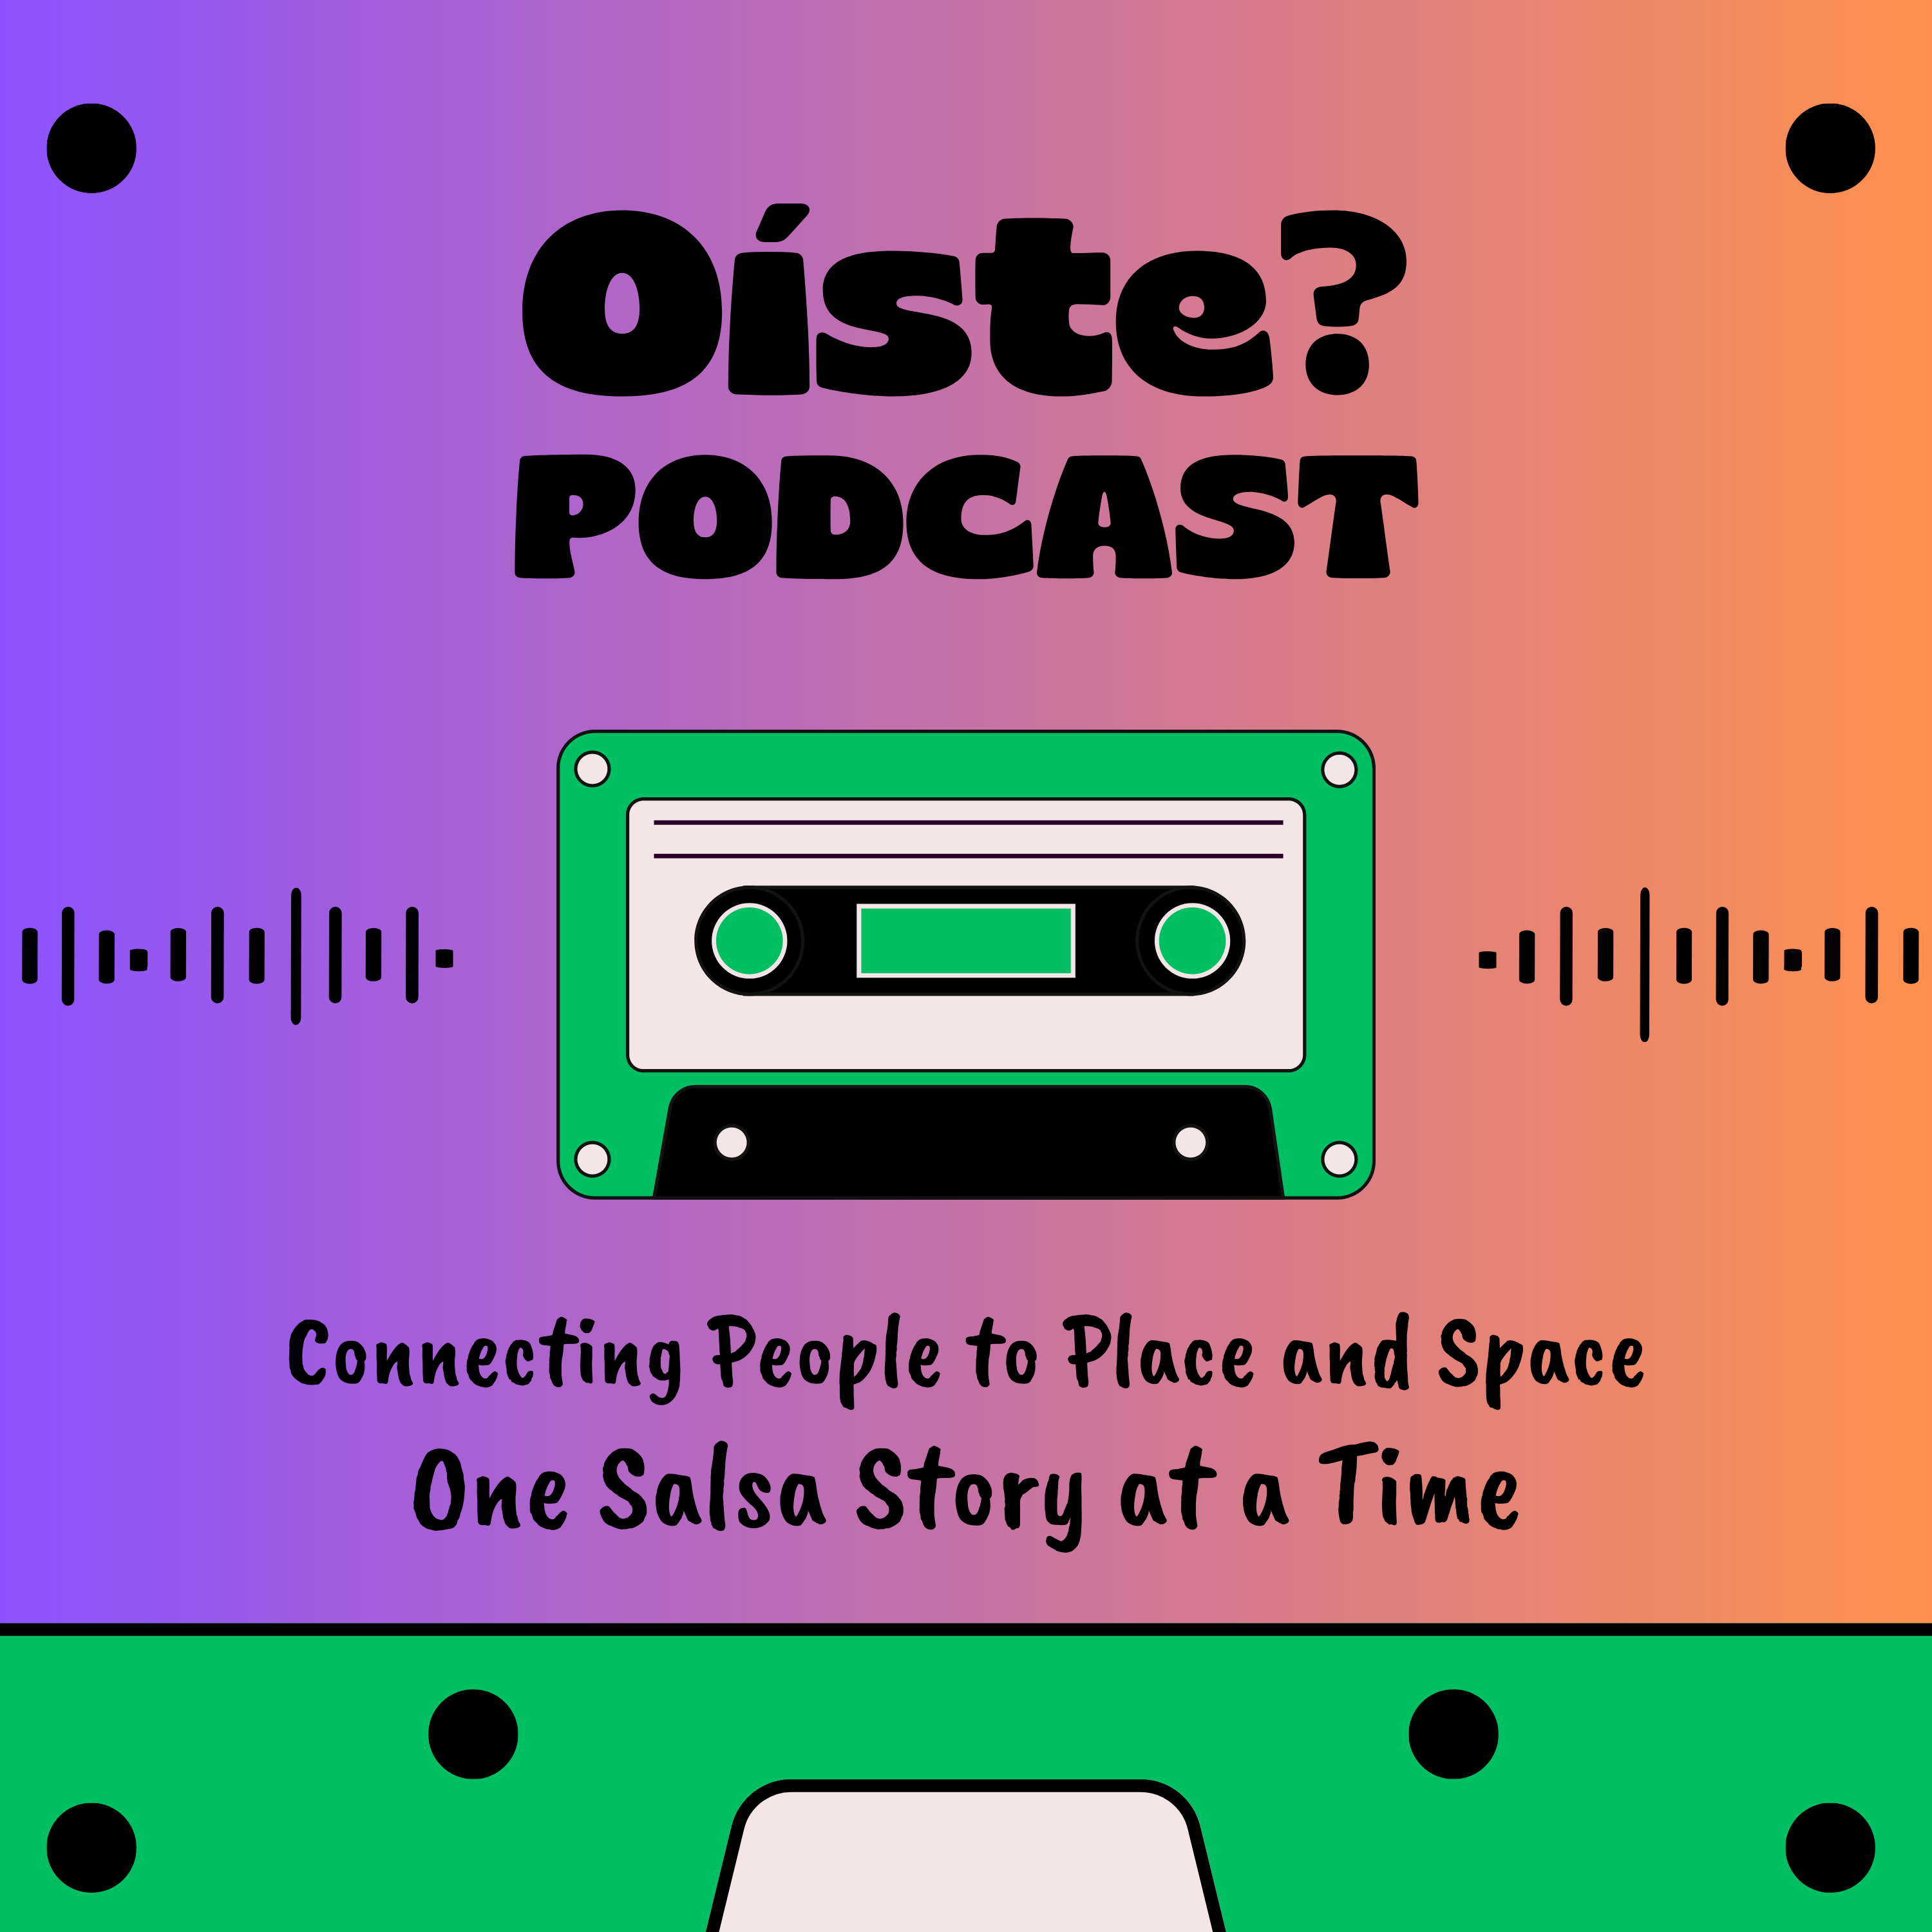 The cover for the Oíste? Podcast series. The text on the photo reads Oíste? Podcast Connecting People to Place and Space One Salsa Story at a Time. There is a cassette player in the middle with sound waves coming out of the sides.